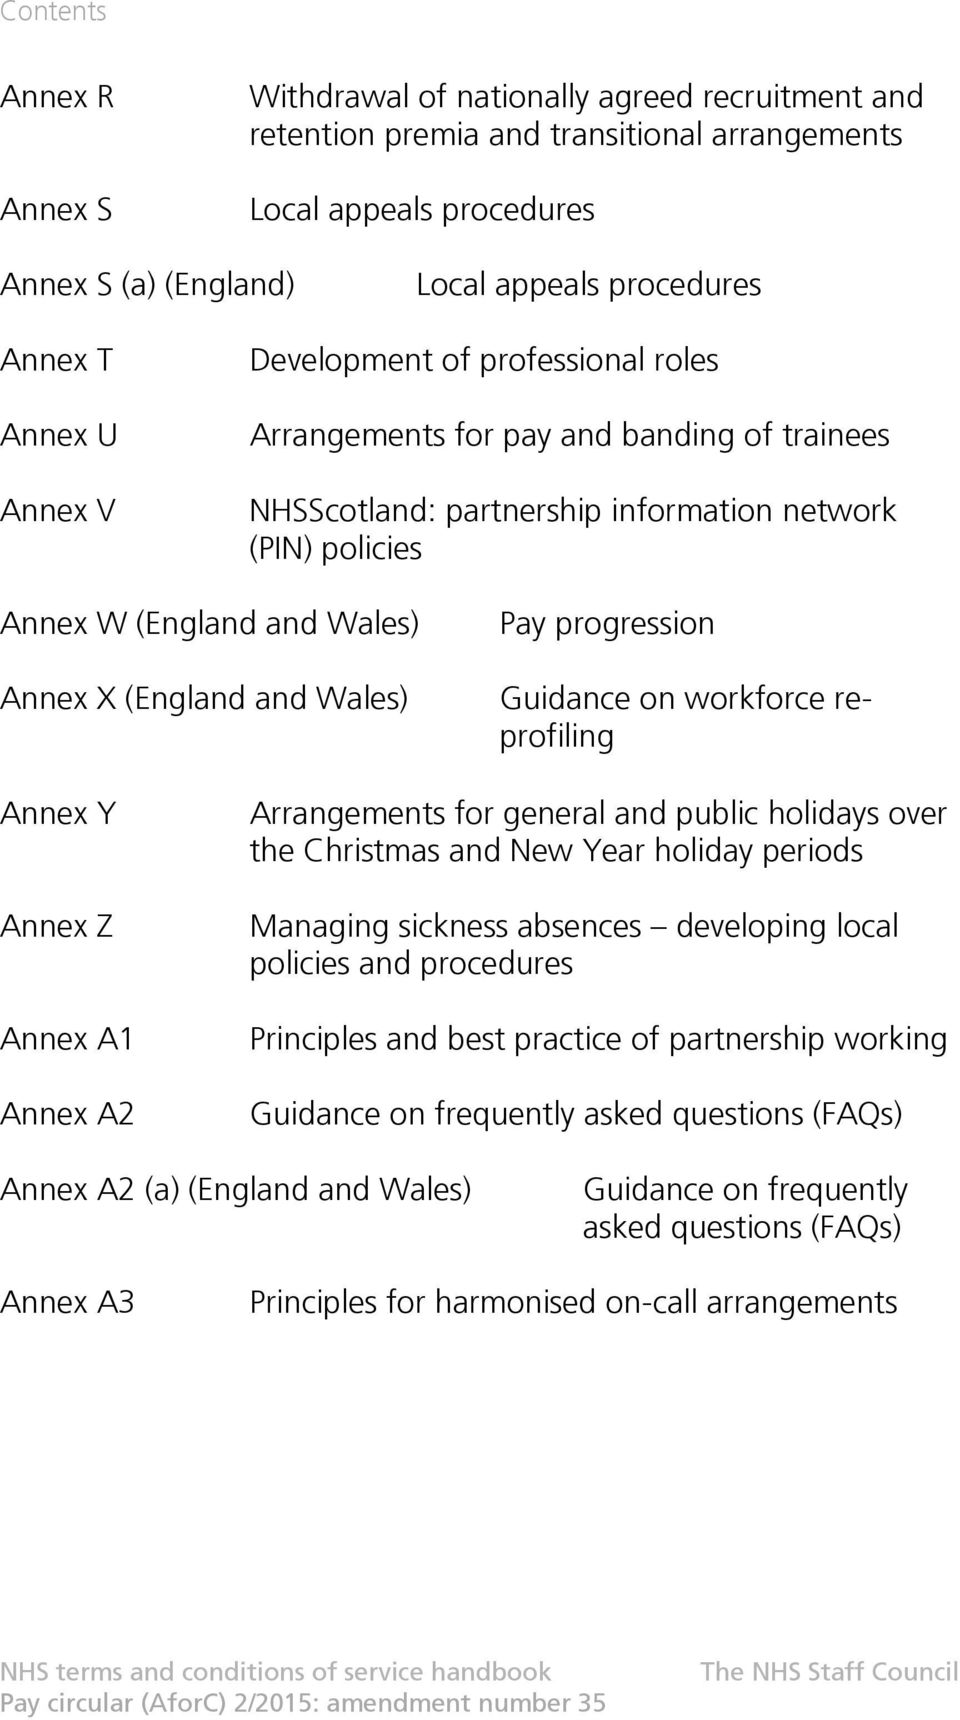 and Wales) Pay progression Guidance on workforce reprofiling Annex Y Annex Z Annex A1 Annex A2 Arrangements for general and public holidays over the Christmas and New Year holiday periods Managing